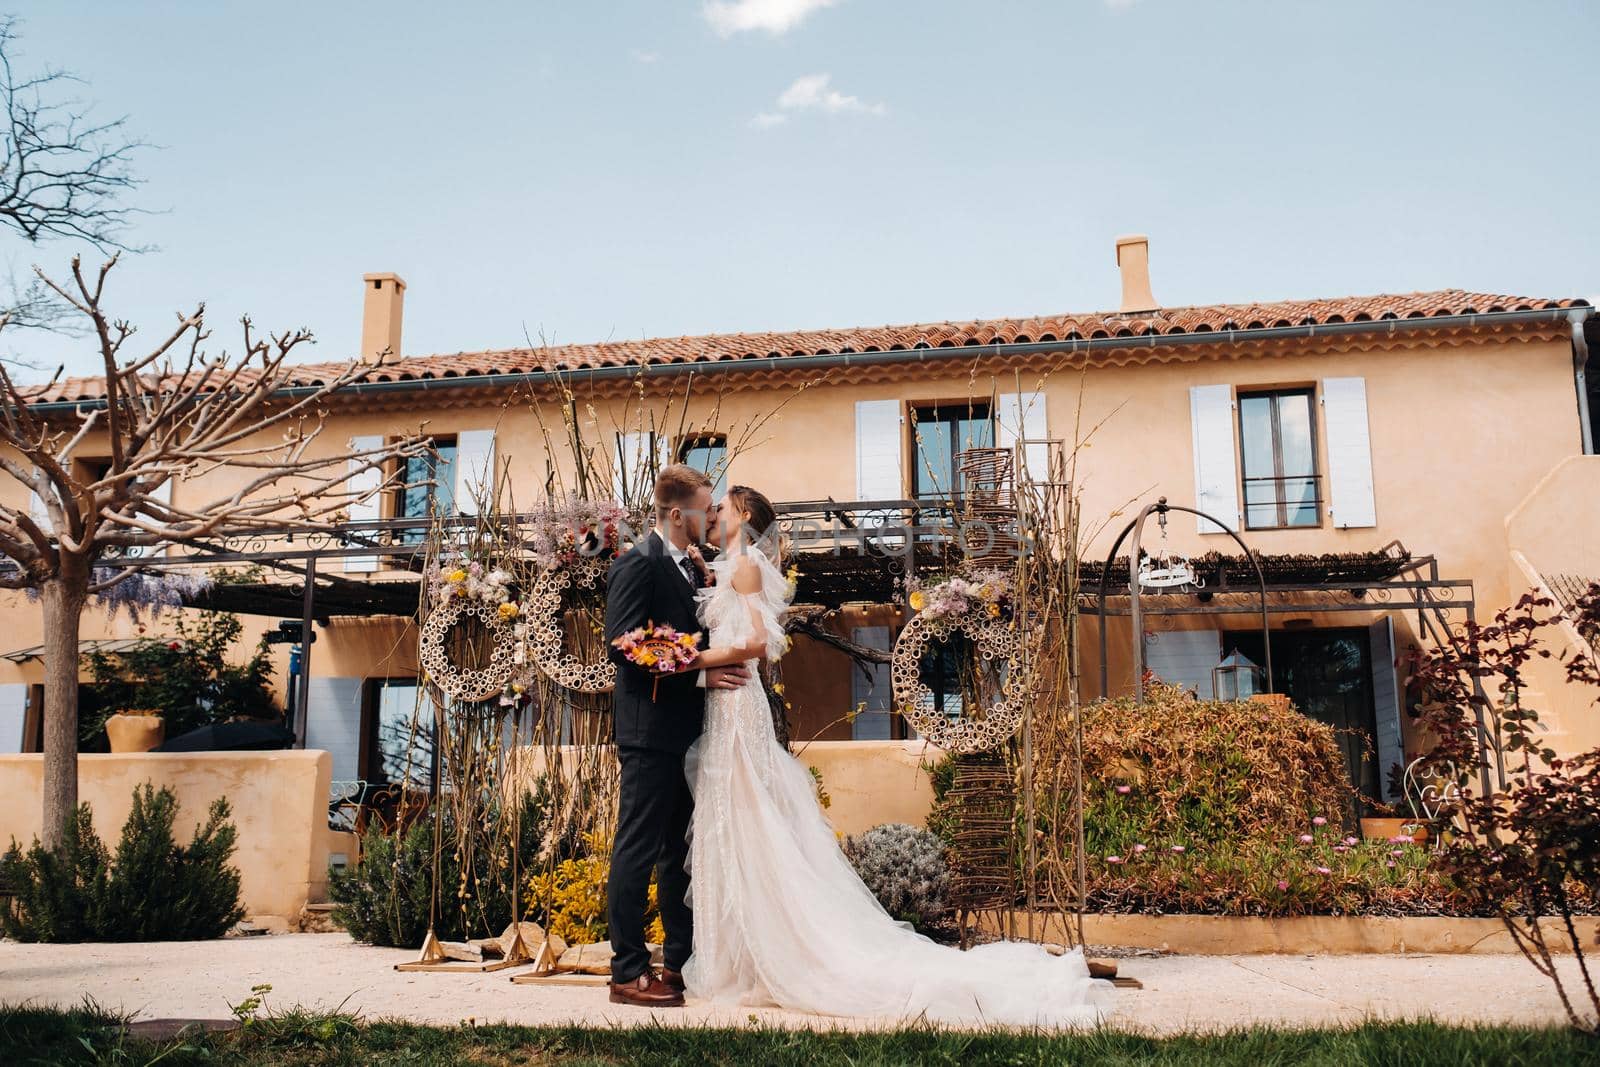 Wedding couple near a Villa in France.Wedding in Provence.Wedding photo shoot in France by Lobachad